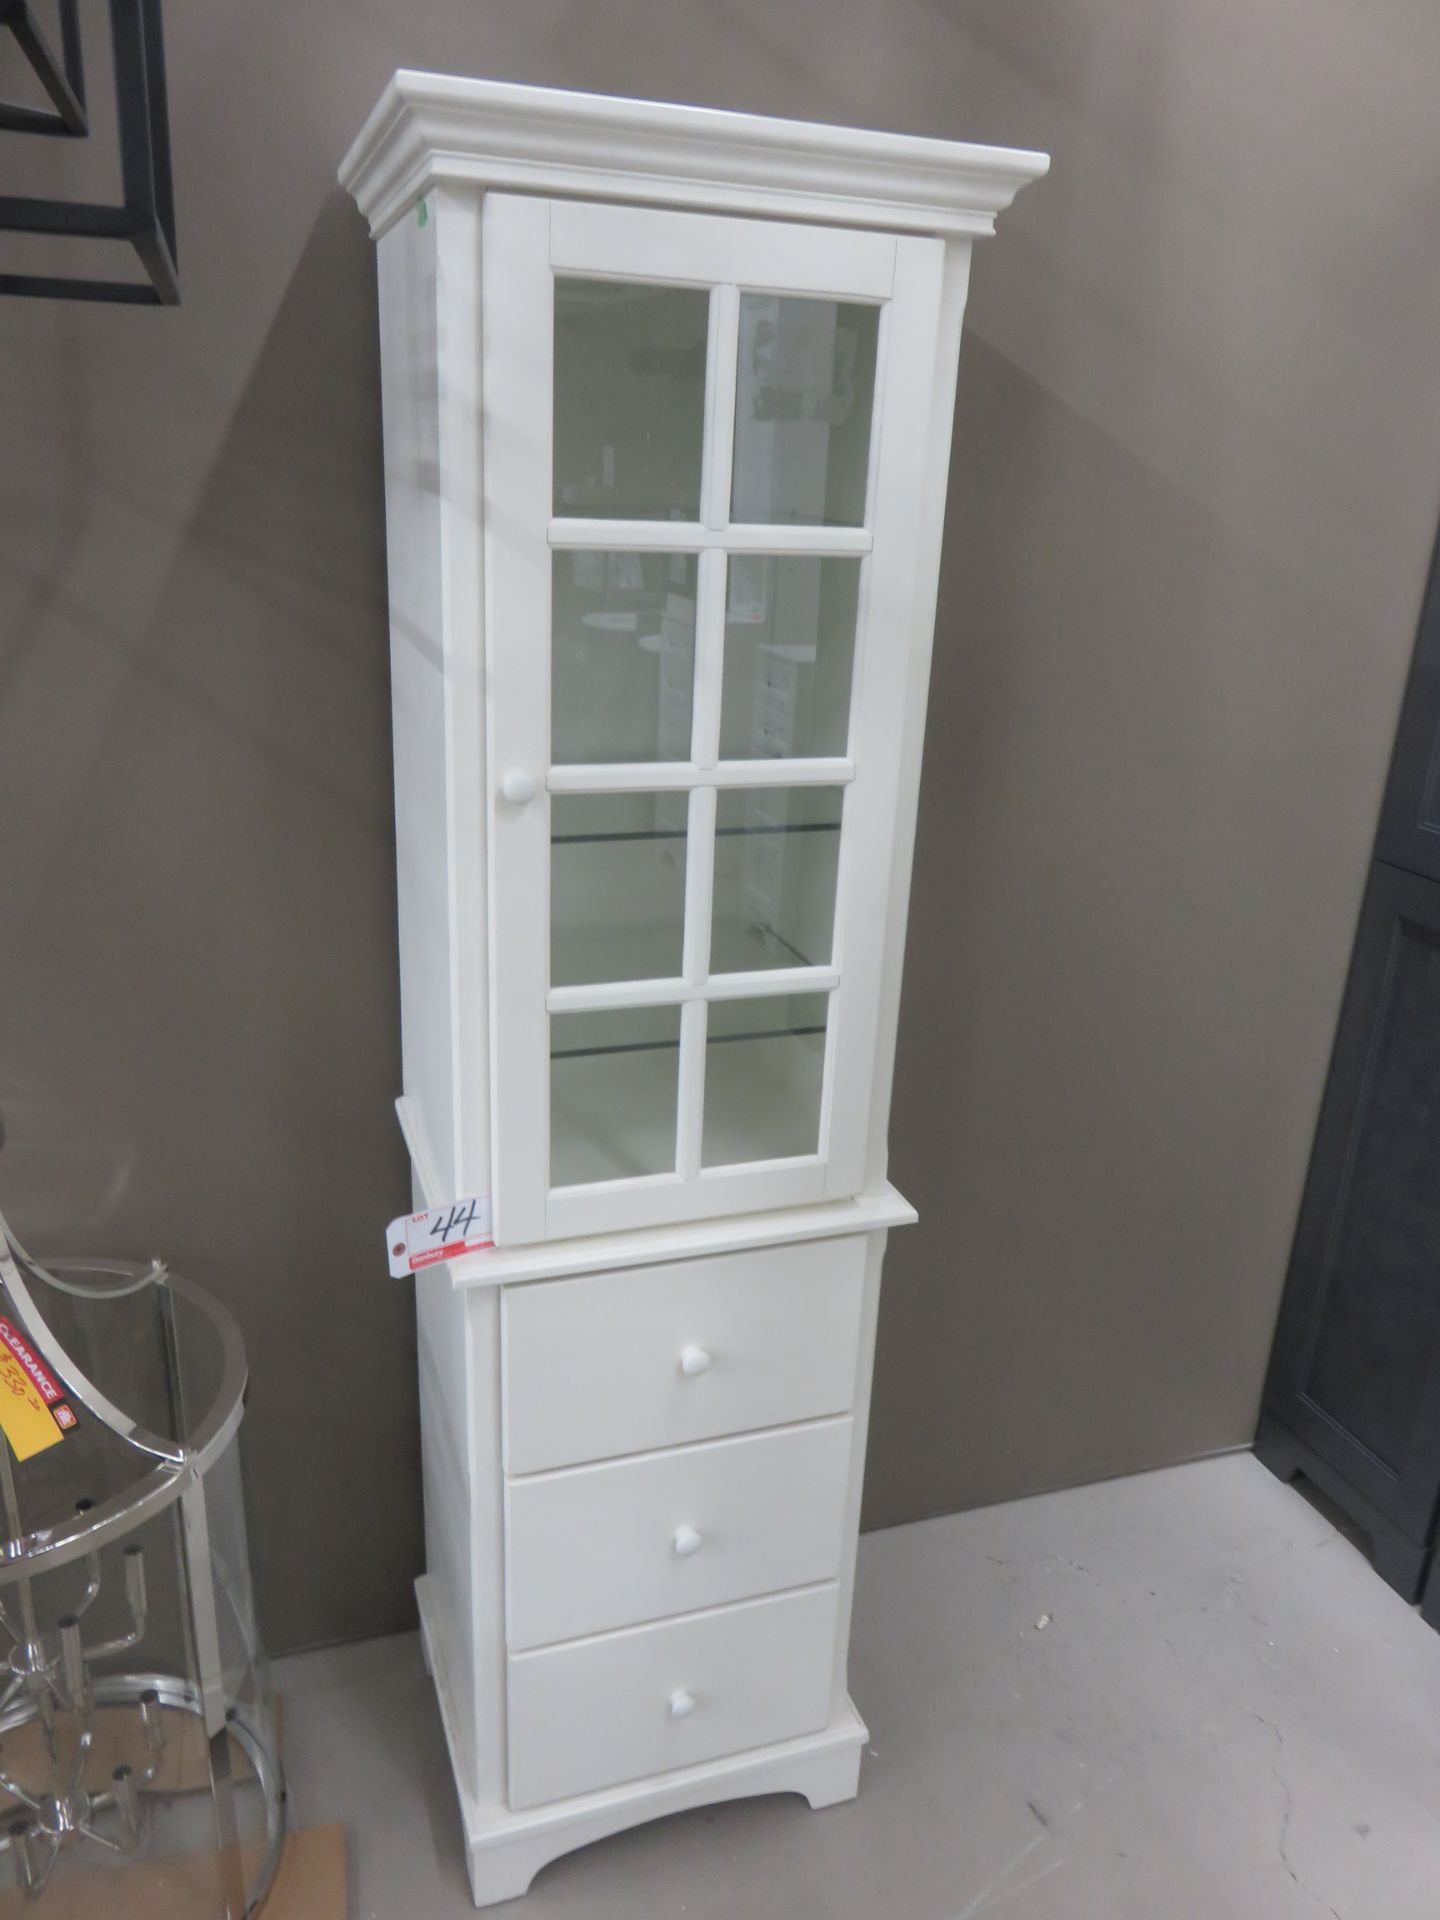 HARVEST CLOUD WHITE 22" X 17.5" X 76"H LINEN TOWER, DOVETAIL DRAWERS W/ 3 GLASS SHELVES - (NEW IN - Image 2 of 2